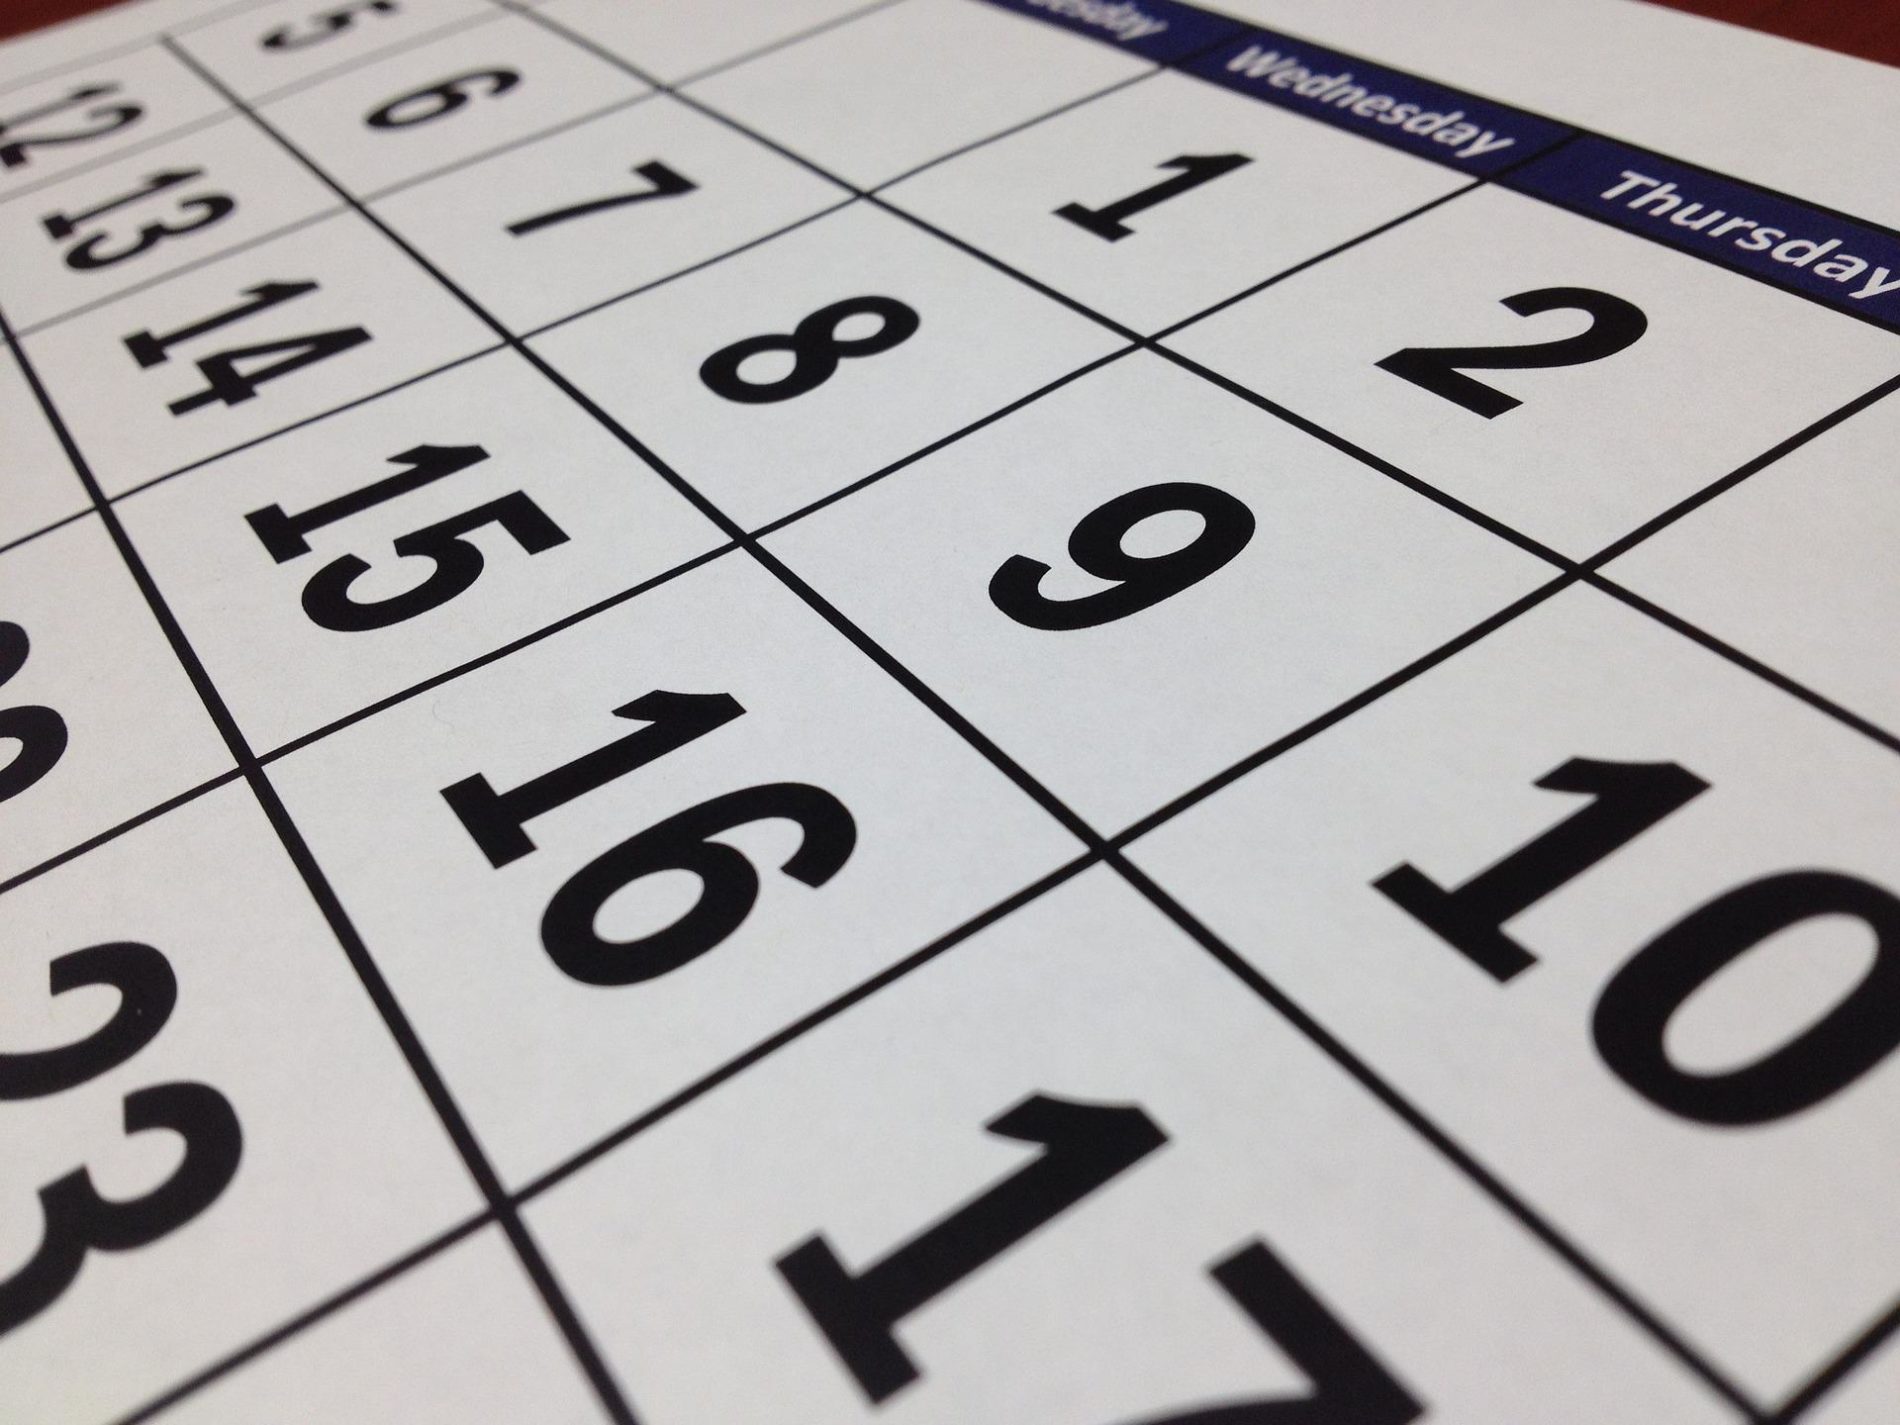 What does your work social calendar look like?